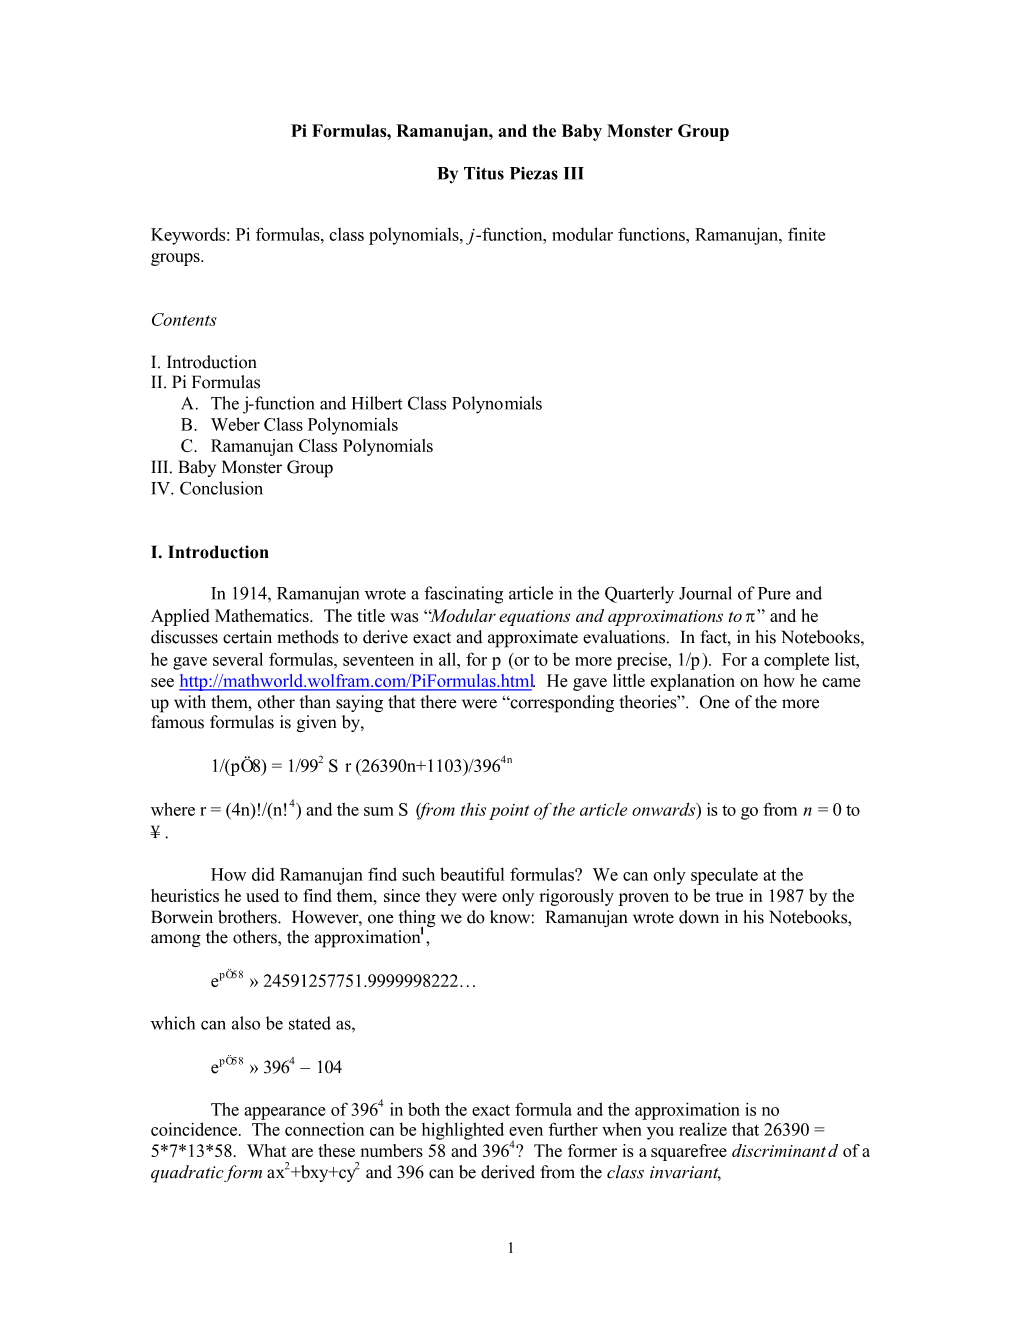 Pi Formulas, Ramanujan, and the Baby Monster Group By